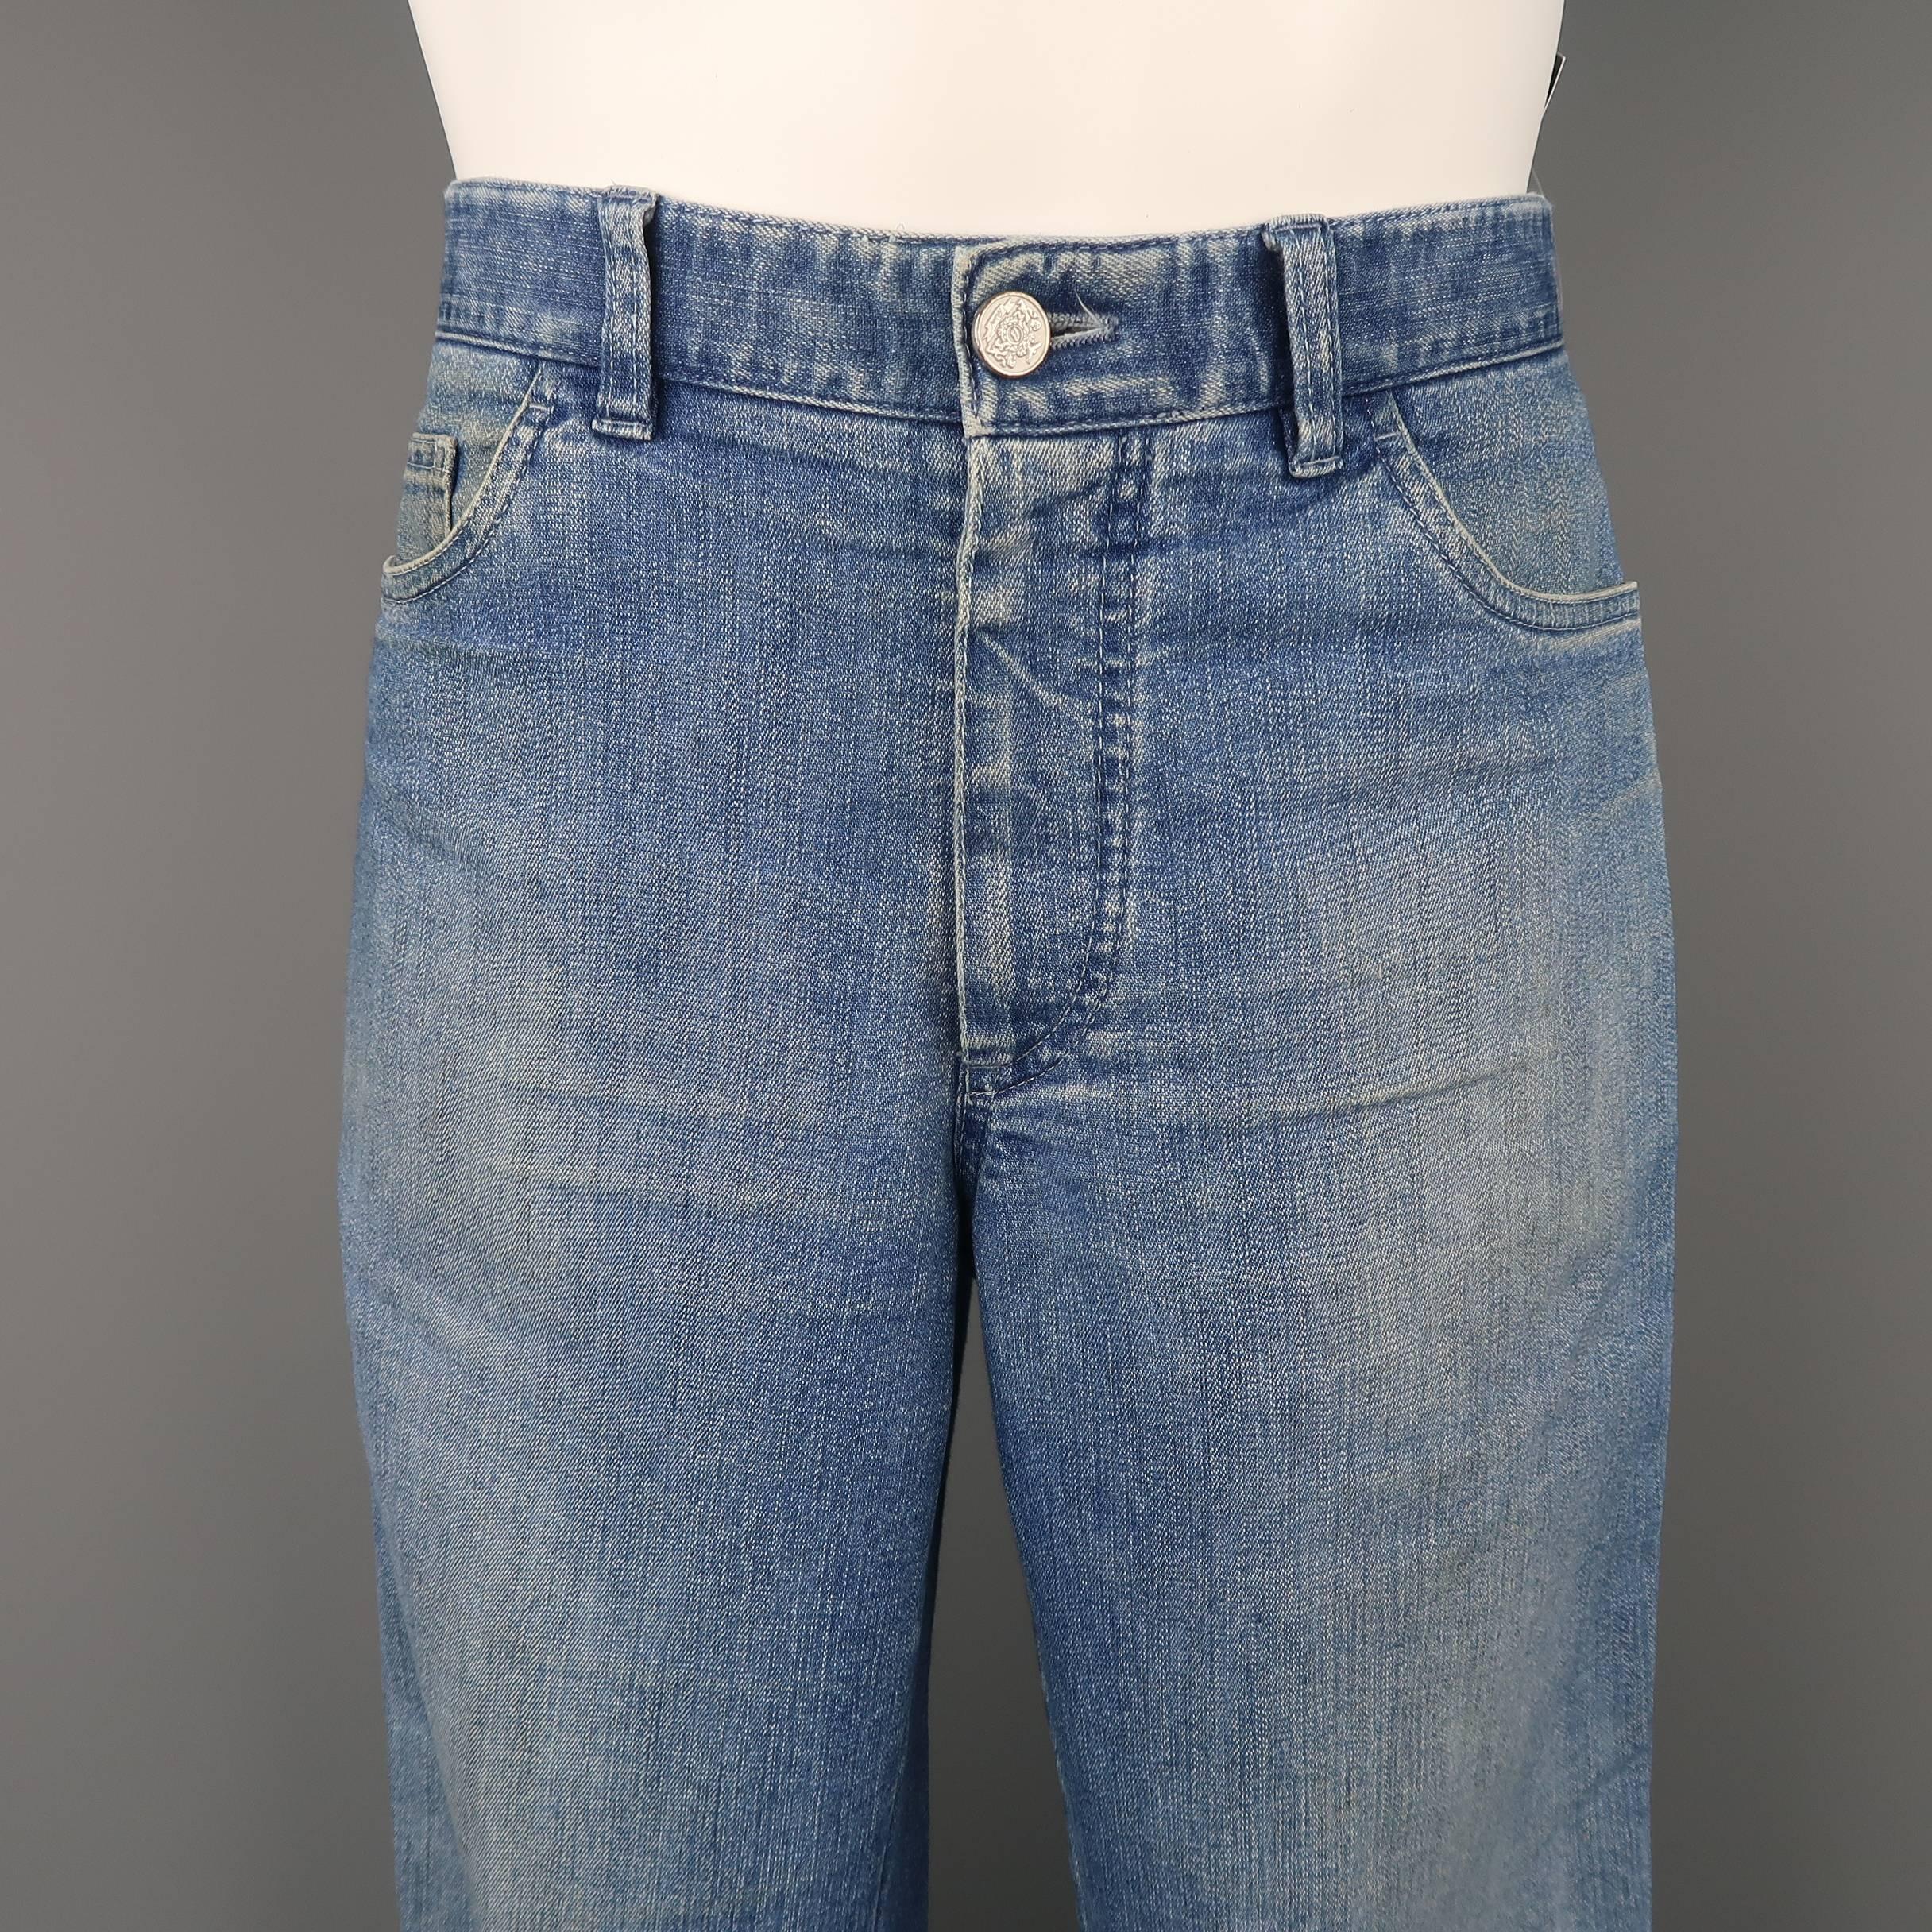 BRIONI straight leg jeans come in a light medium dirty wash denim with an engraved button and classic five pocket style. Wear throughout. As-is. Made in Italy.
 
Fair Pre-Owned Condition.
Marked: 34
 
Measurements:
 
Waist: 34
Rise: 9.5 in.
Inseam: